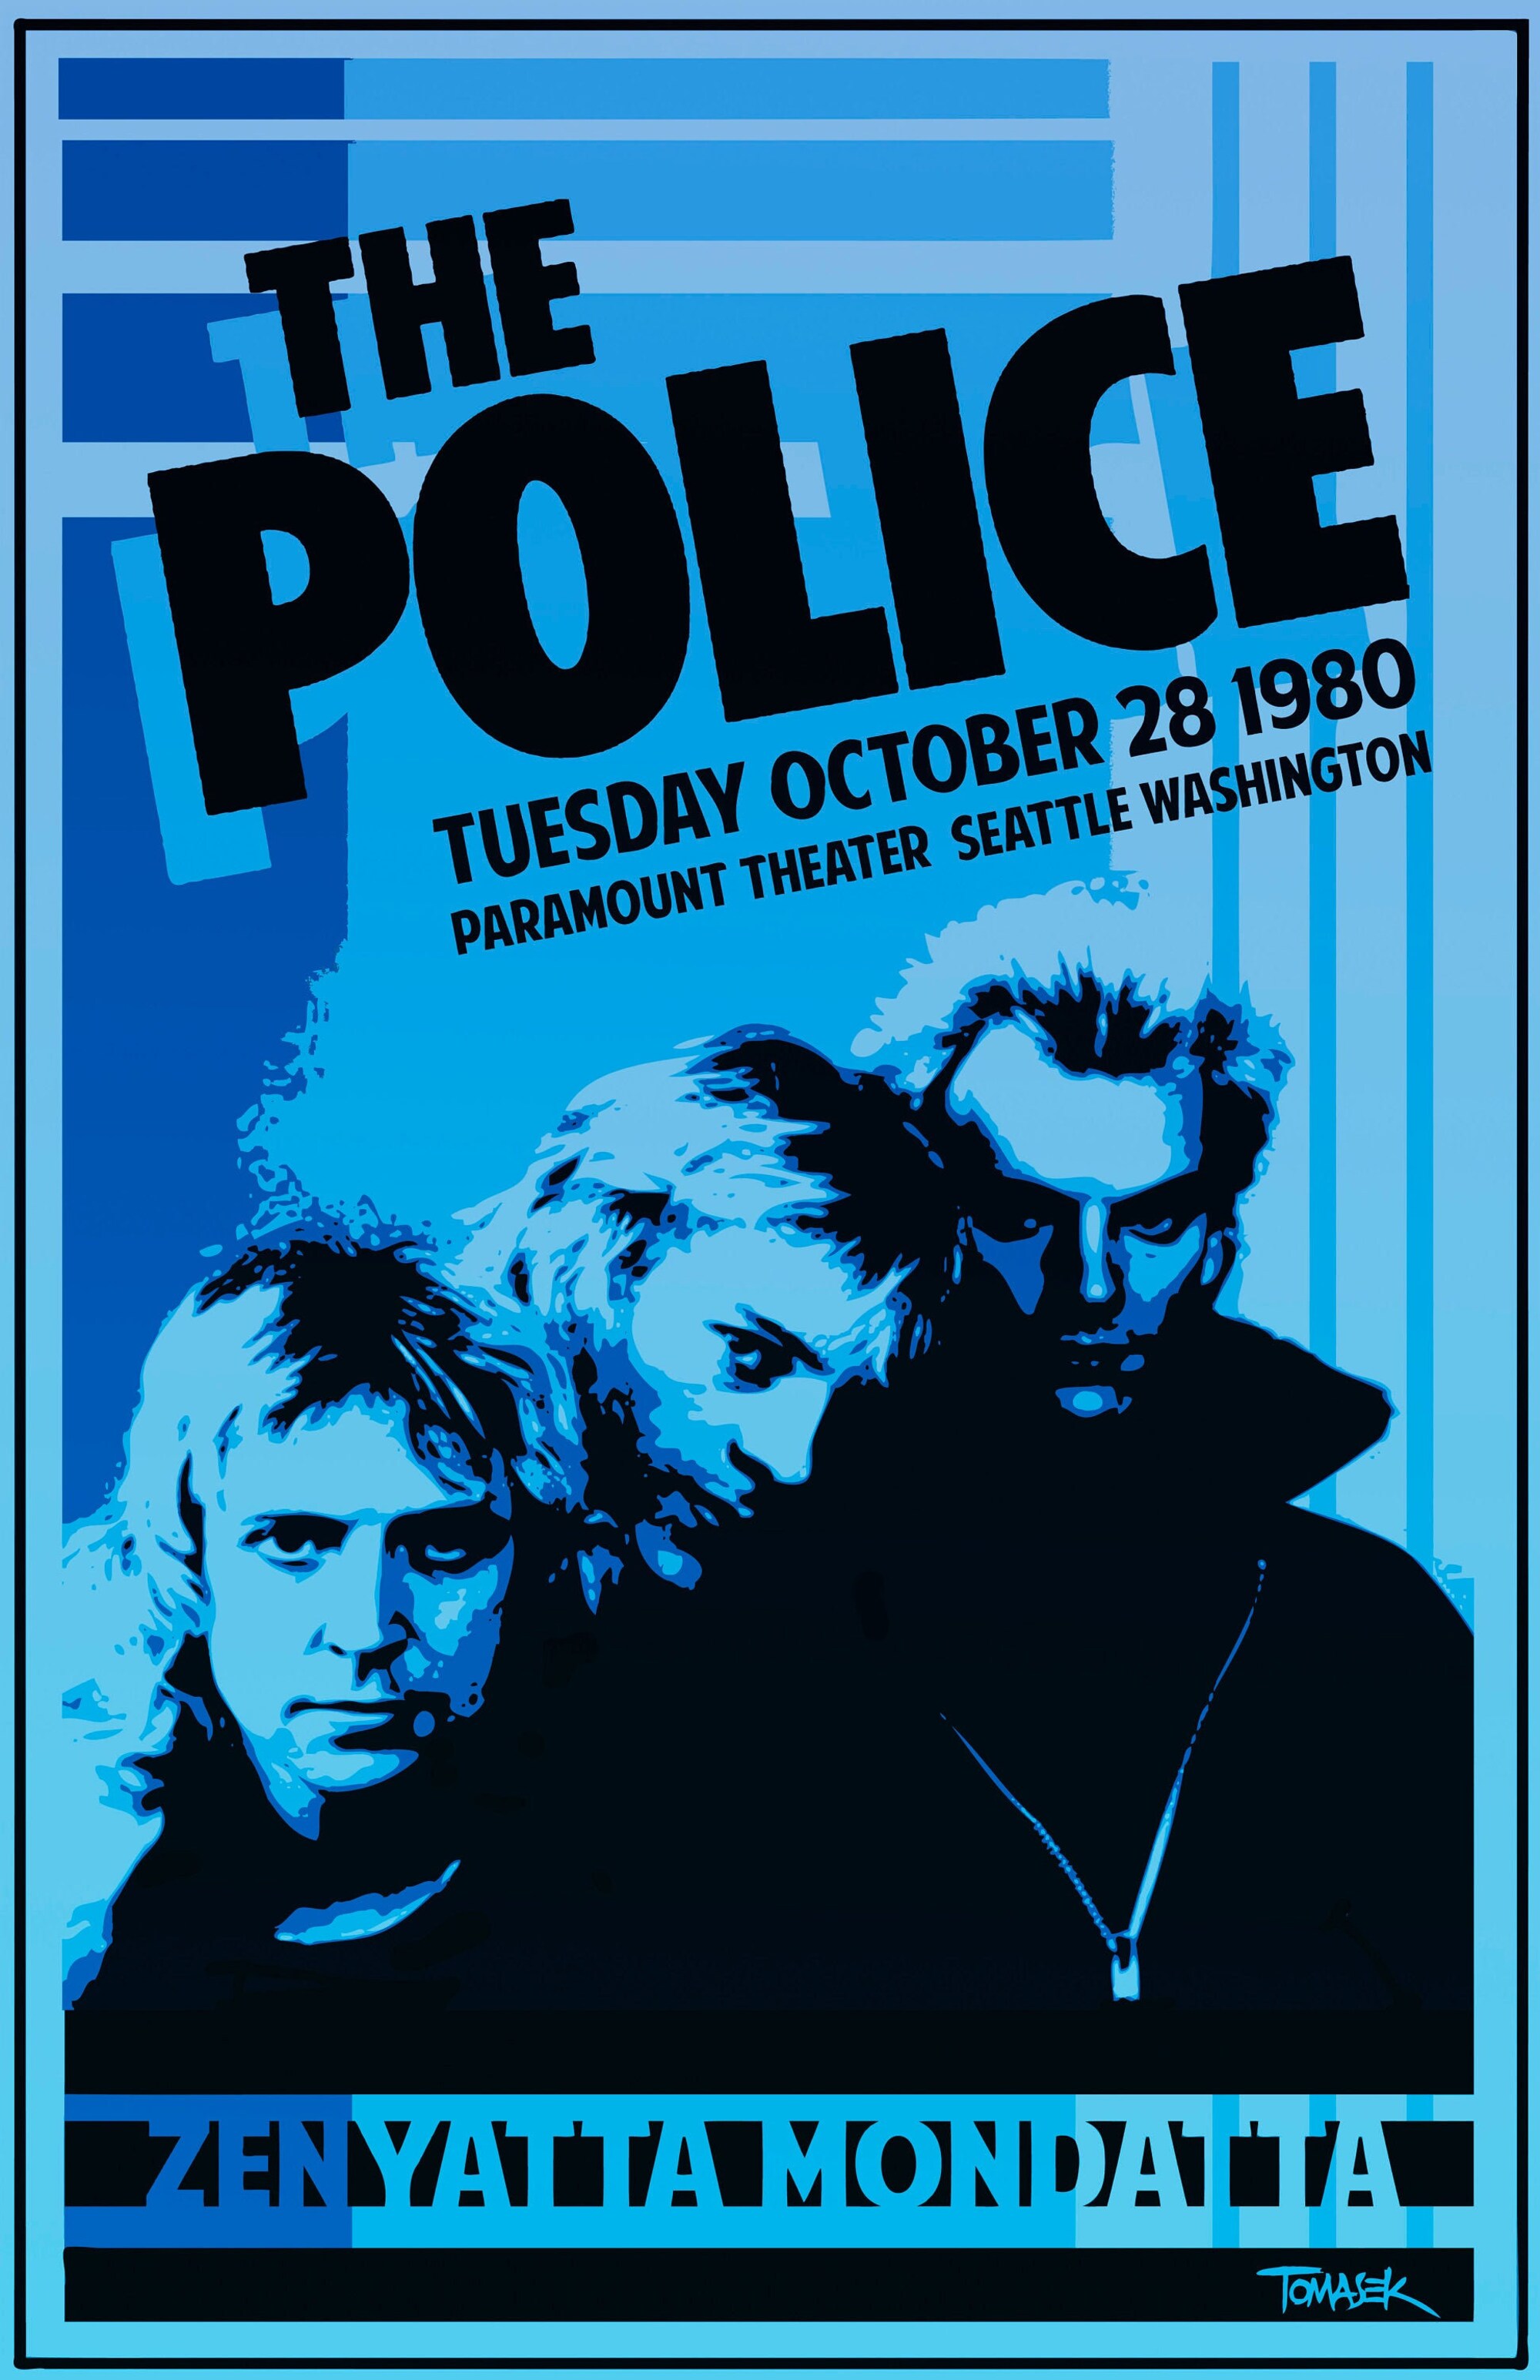 The Police 1980 Tour Poster